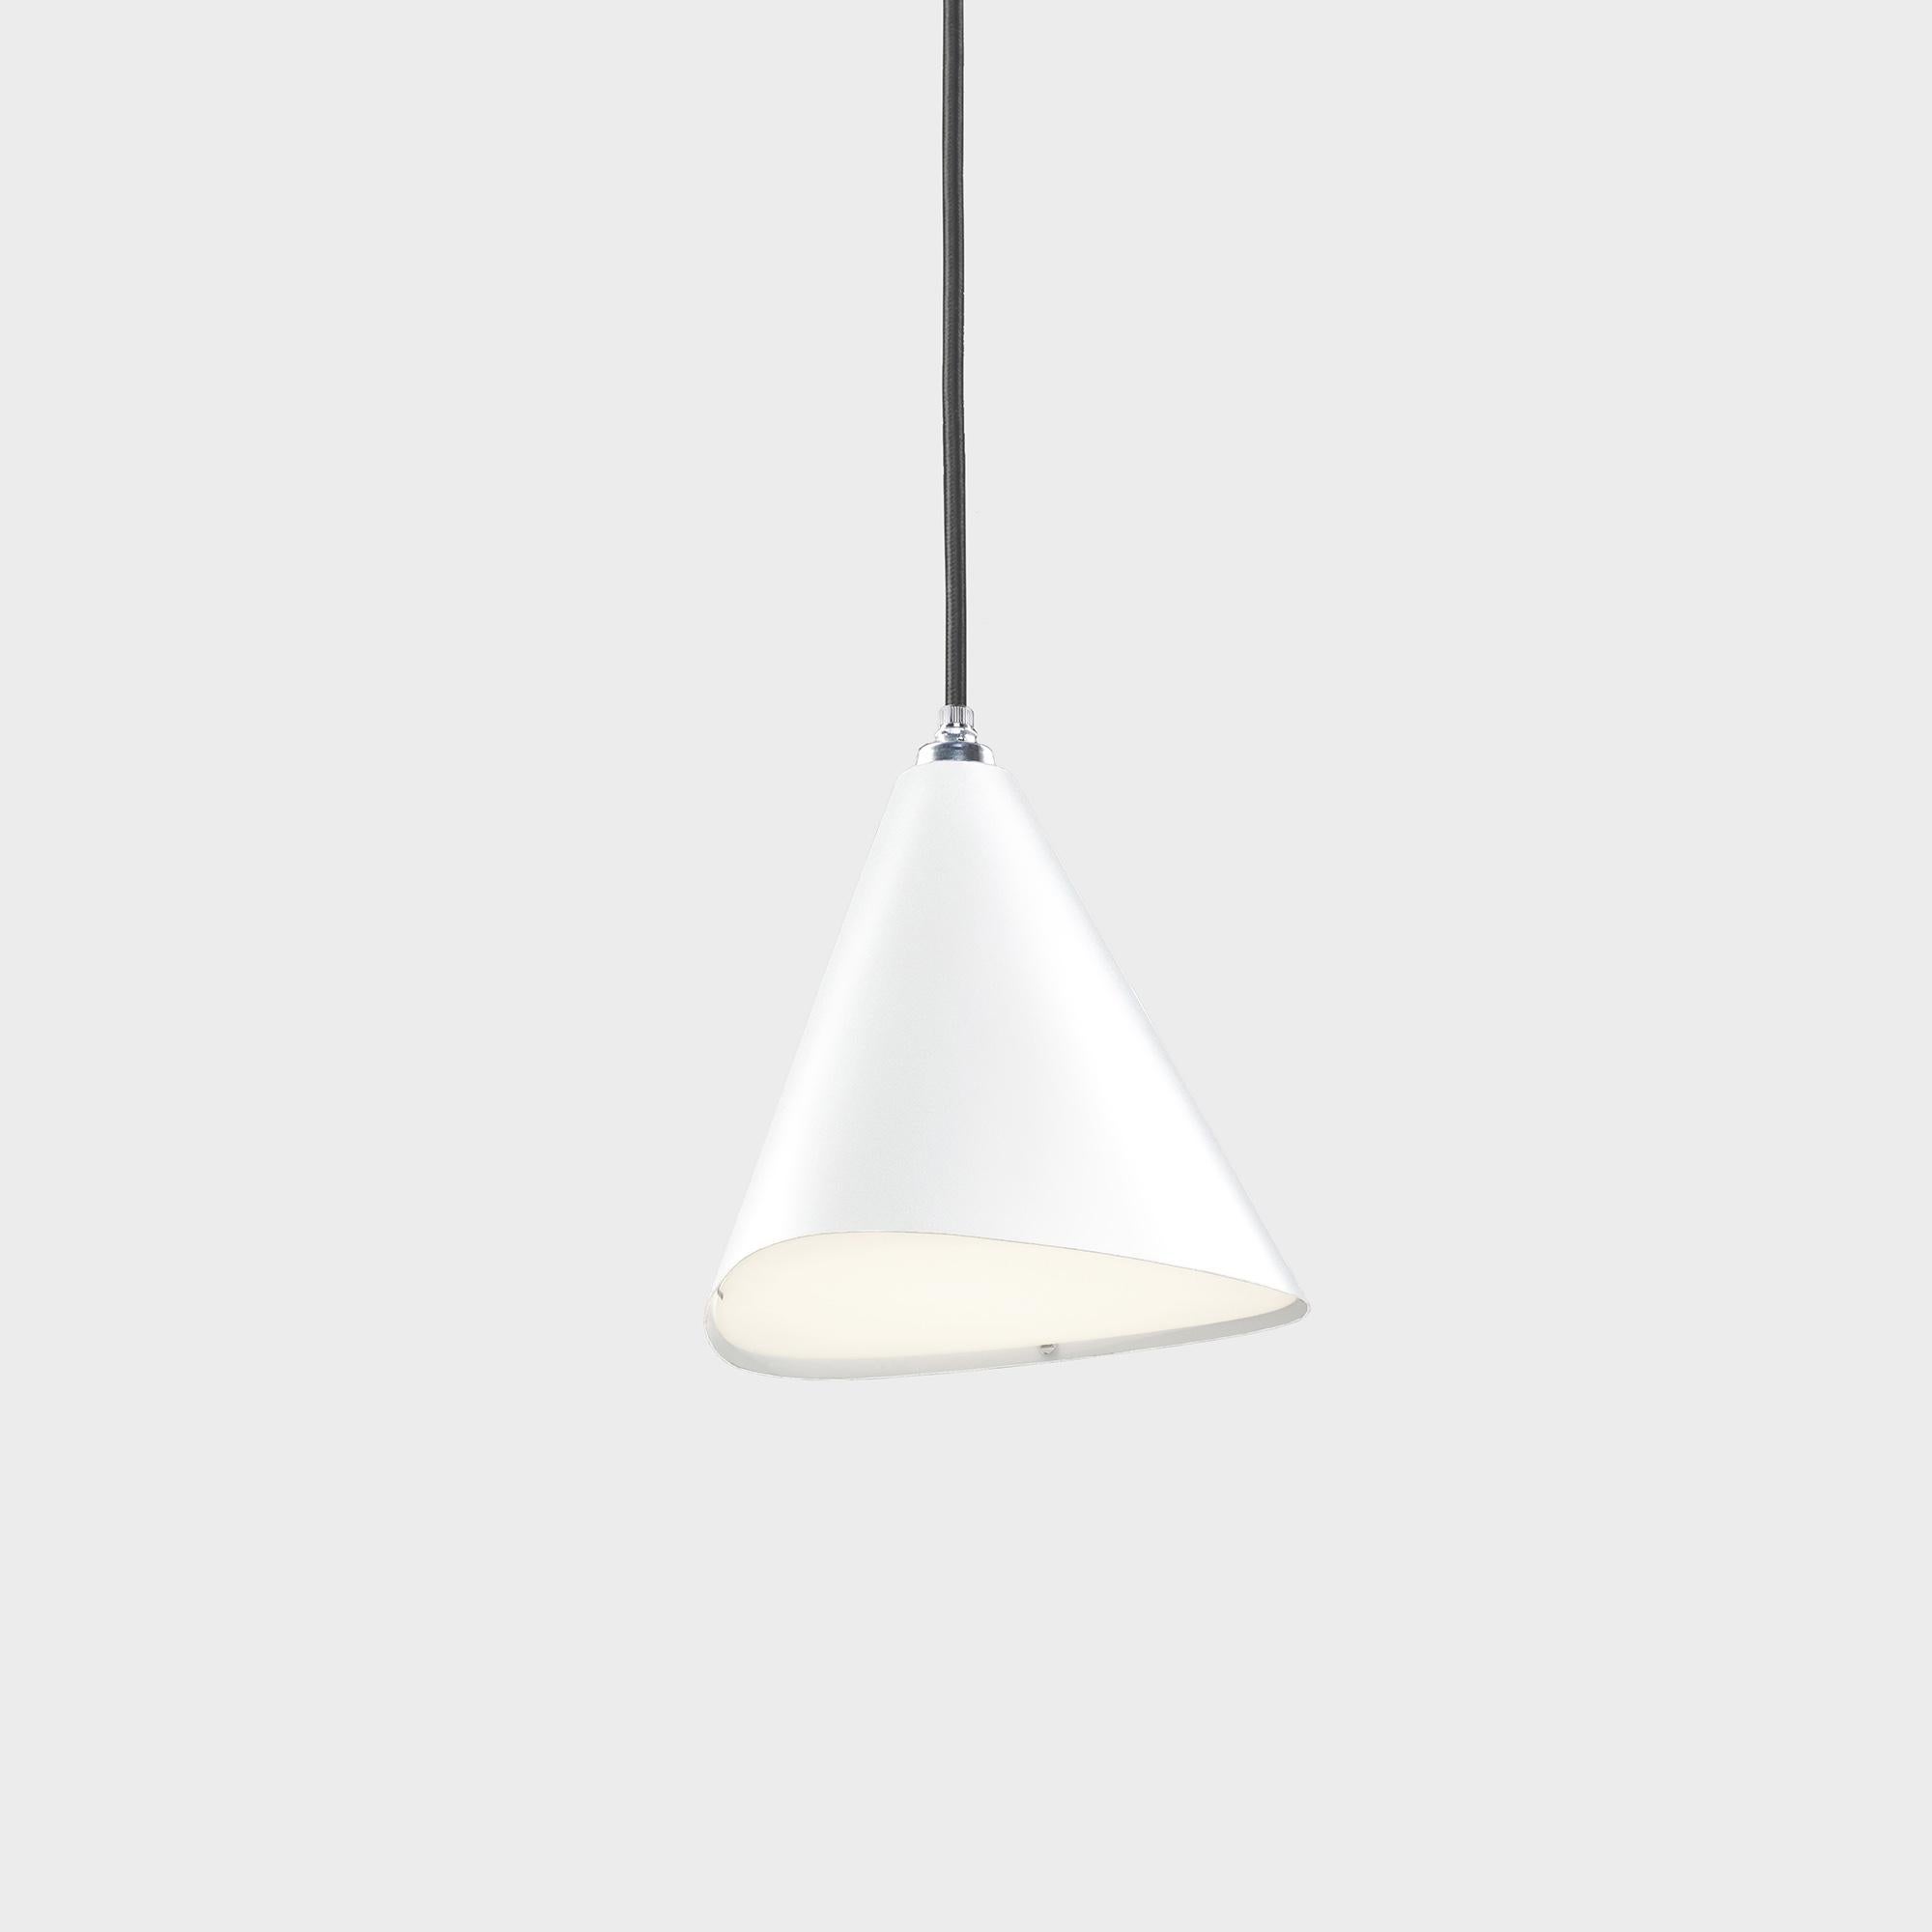 Daniel Becker 'Emily III' pendant lamp in matte white for Moss Objects. Designed by Berlin luminary Daniel Becker and handmade to order using mid-century manufacturing techniques. Executed in high-quality sheet metal with up to ten layers glossy or